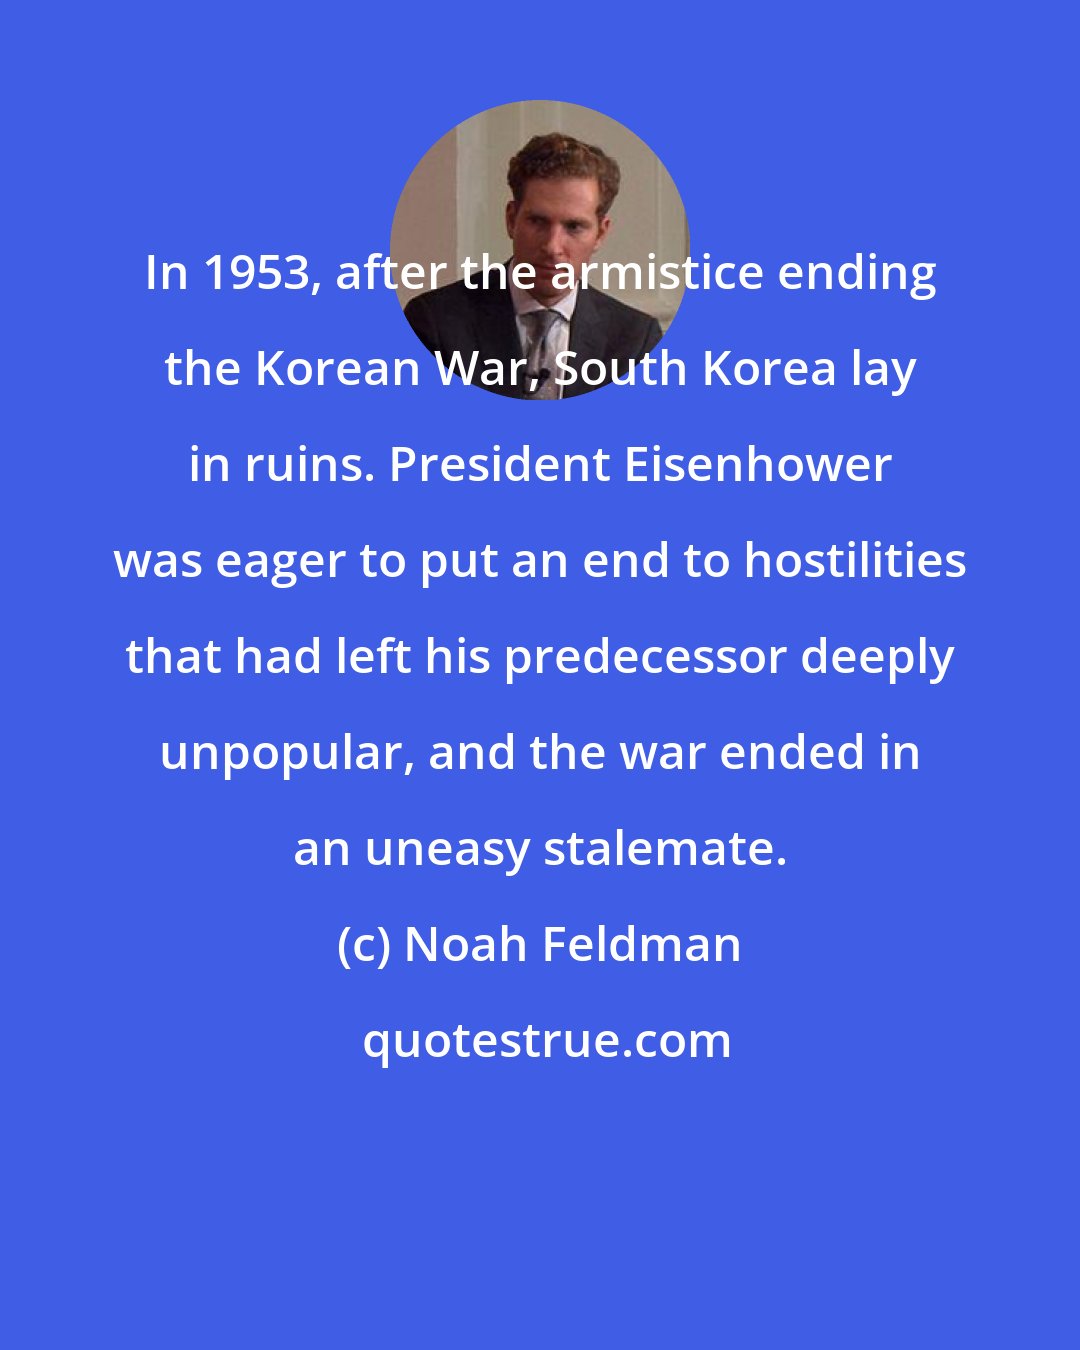 Noah Feldman: In 1953, after the armistice ending the Korean War, South Korea lay in ruins. President Eisenhower was eager to put an end to hostilities that had left his predecessor deeply unpopular, and the war ended in an uneasy stalemate.